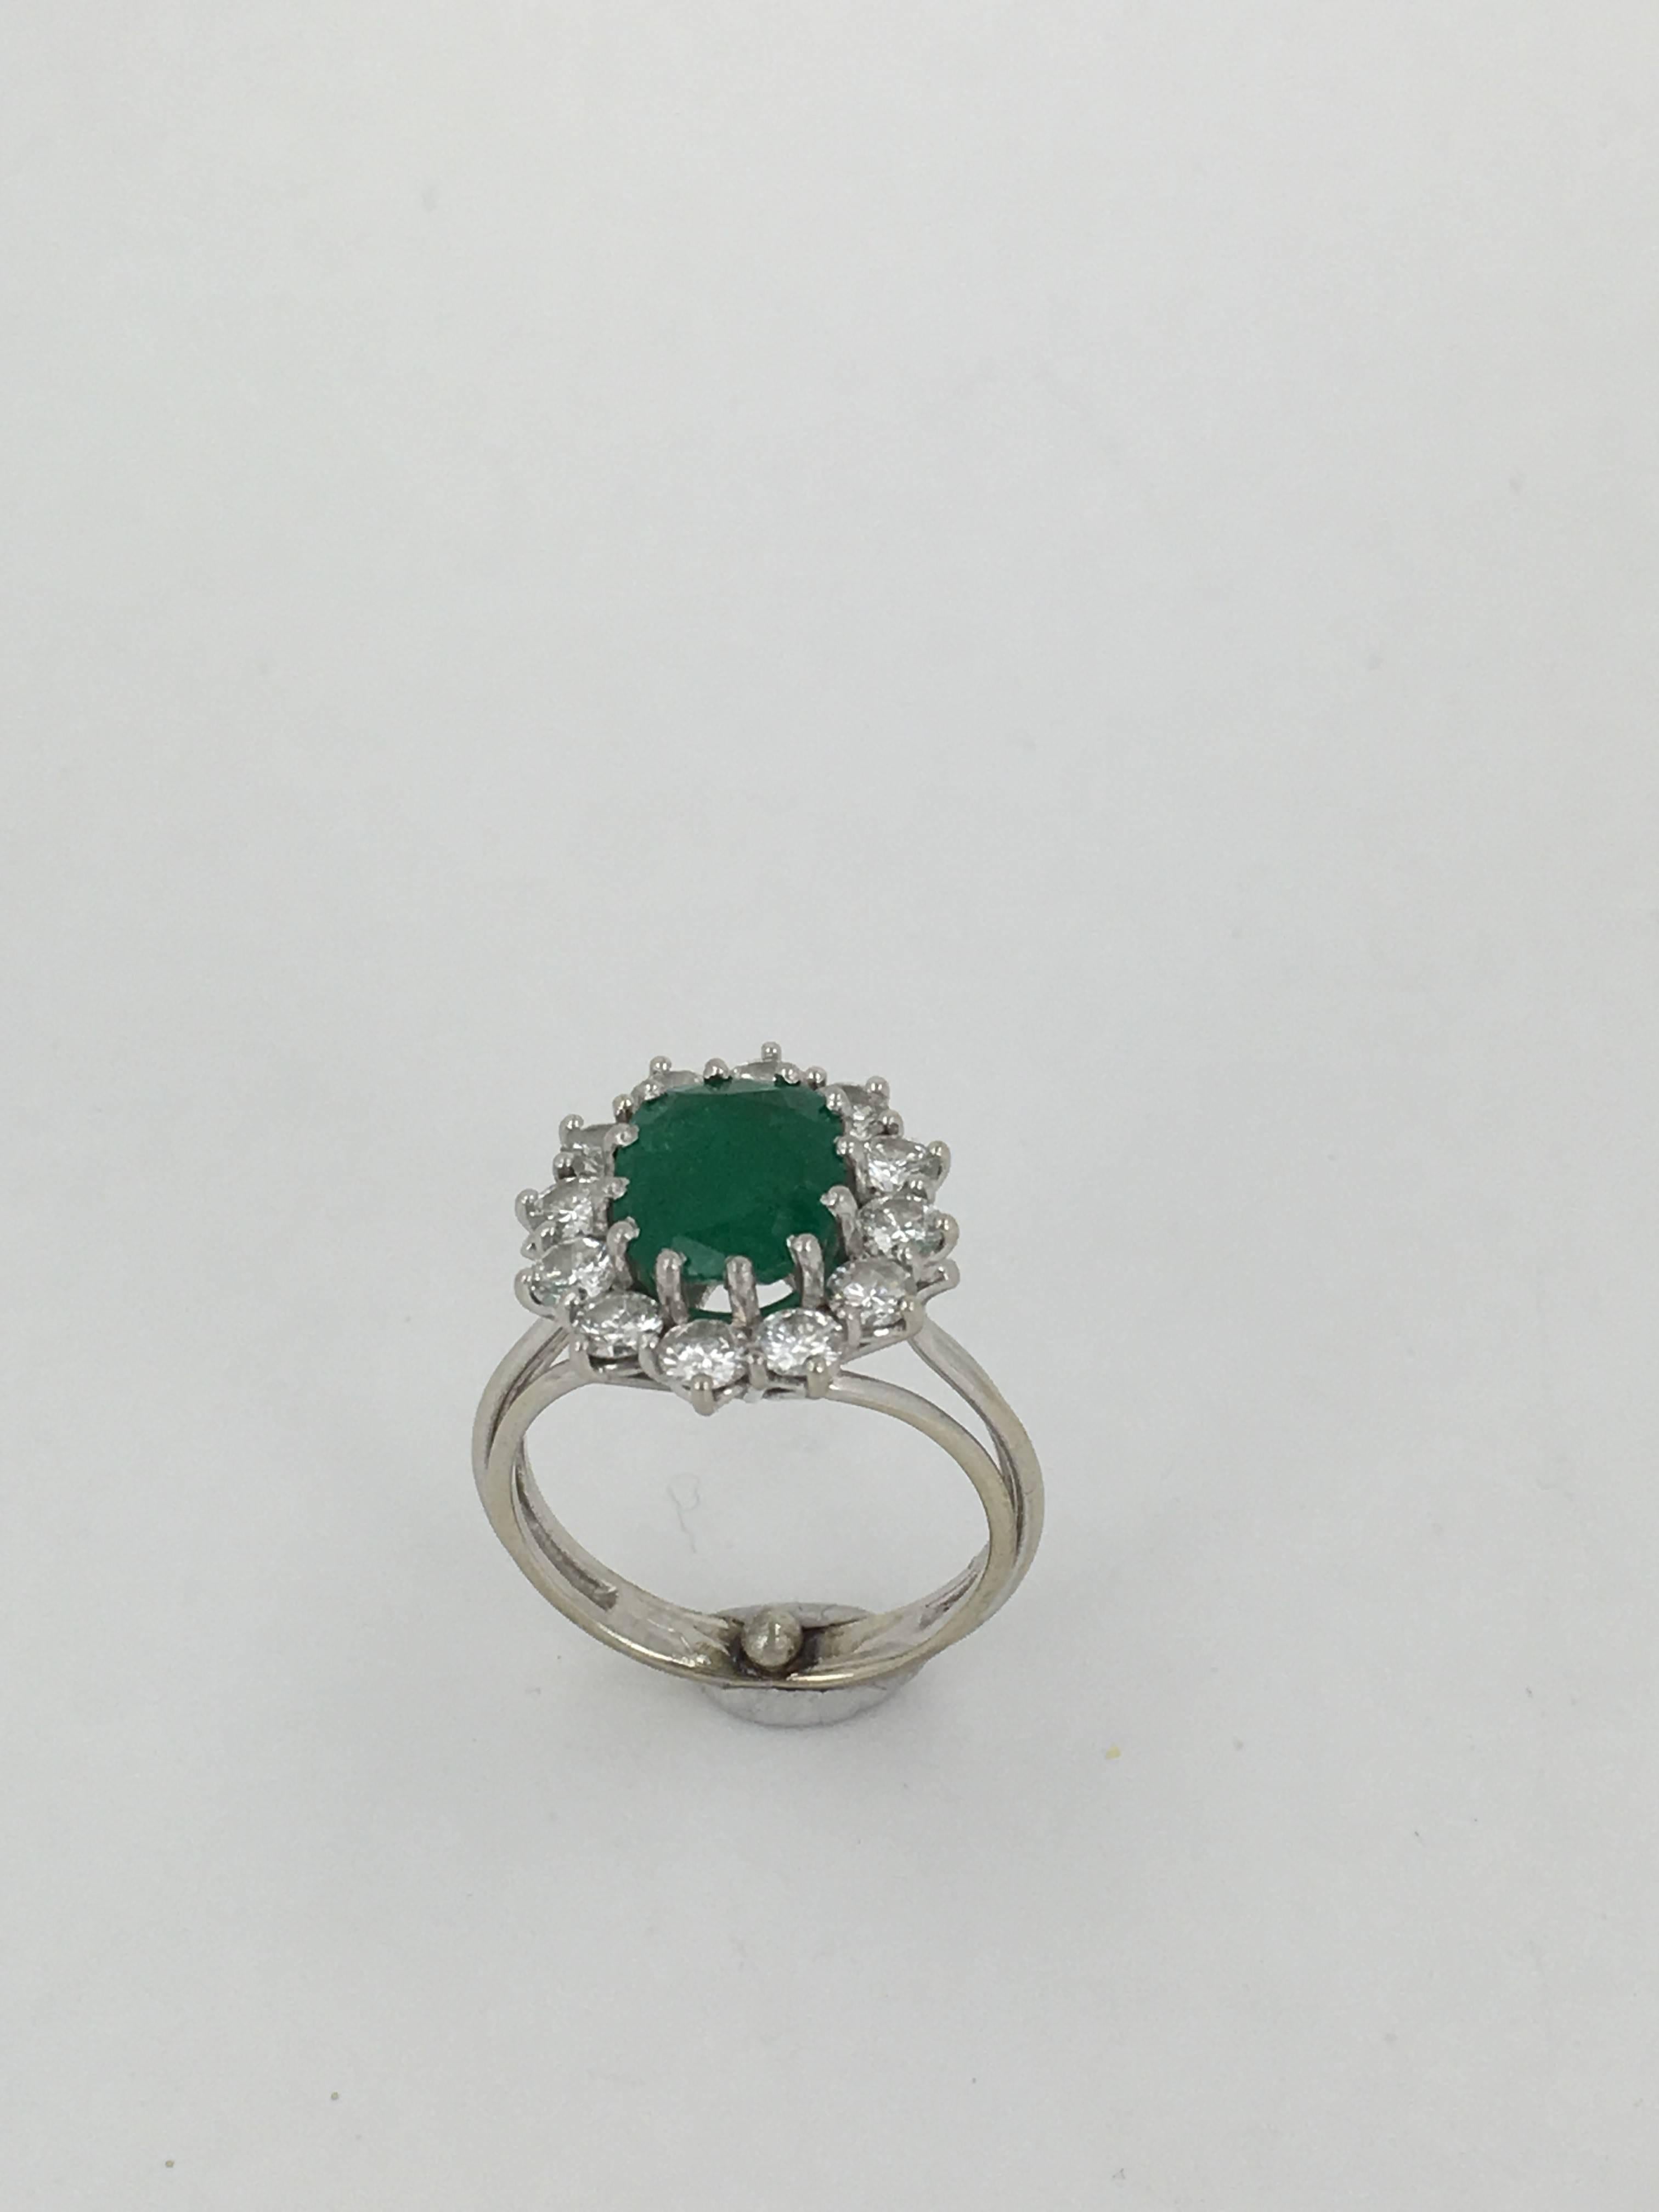 A Large Oval Emerald Approx 2..50CTS Surrounded by 1.50cts of white Diamond set in 18ct White Gold